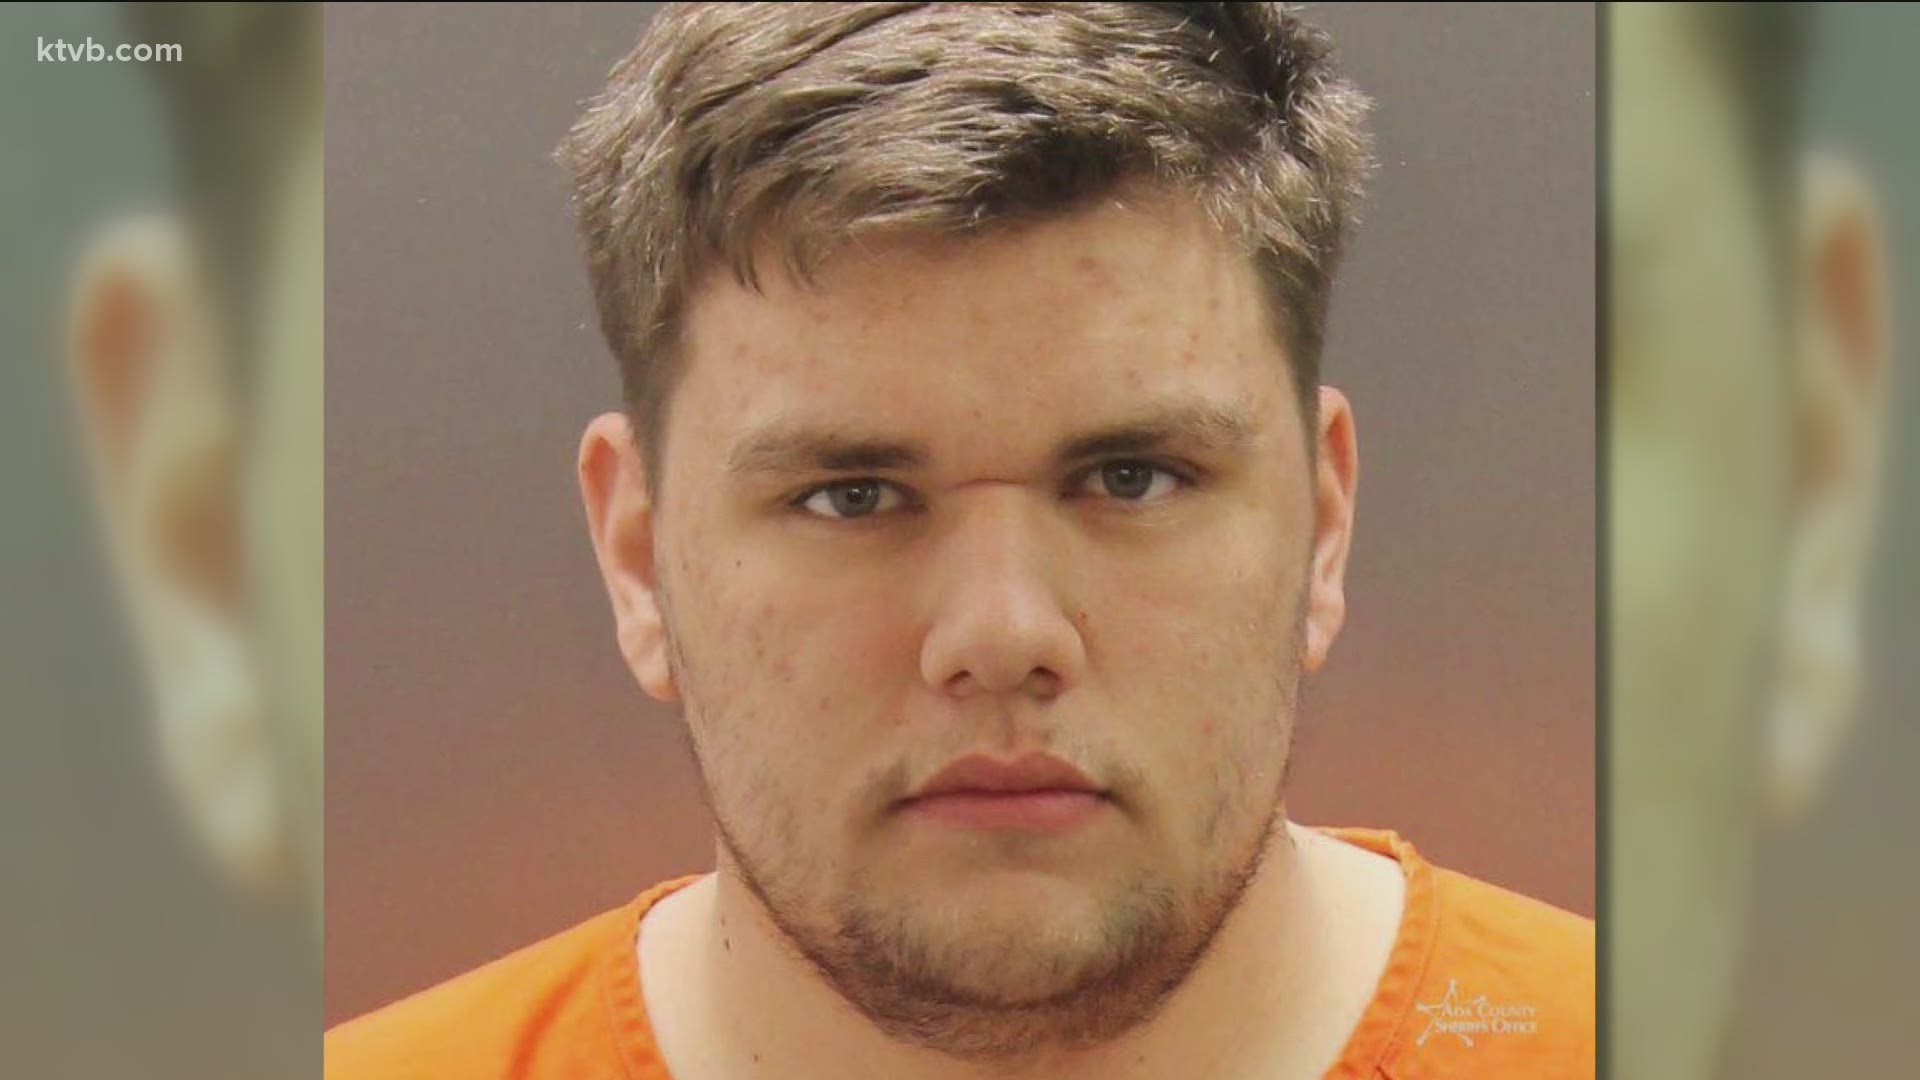 Police say 20-year-old Brett Wilkinson had inappropriate contact with a child in his care